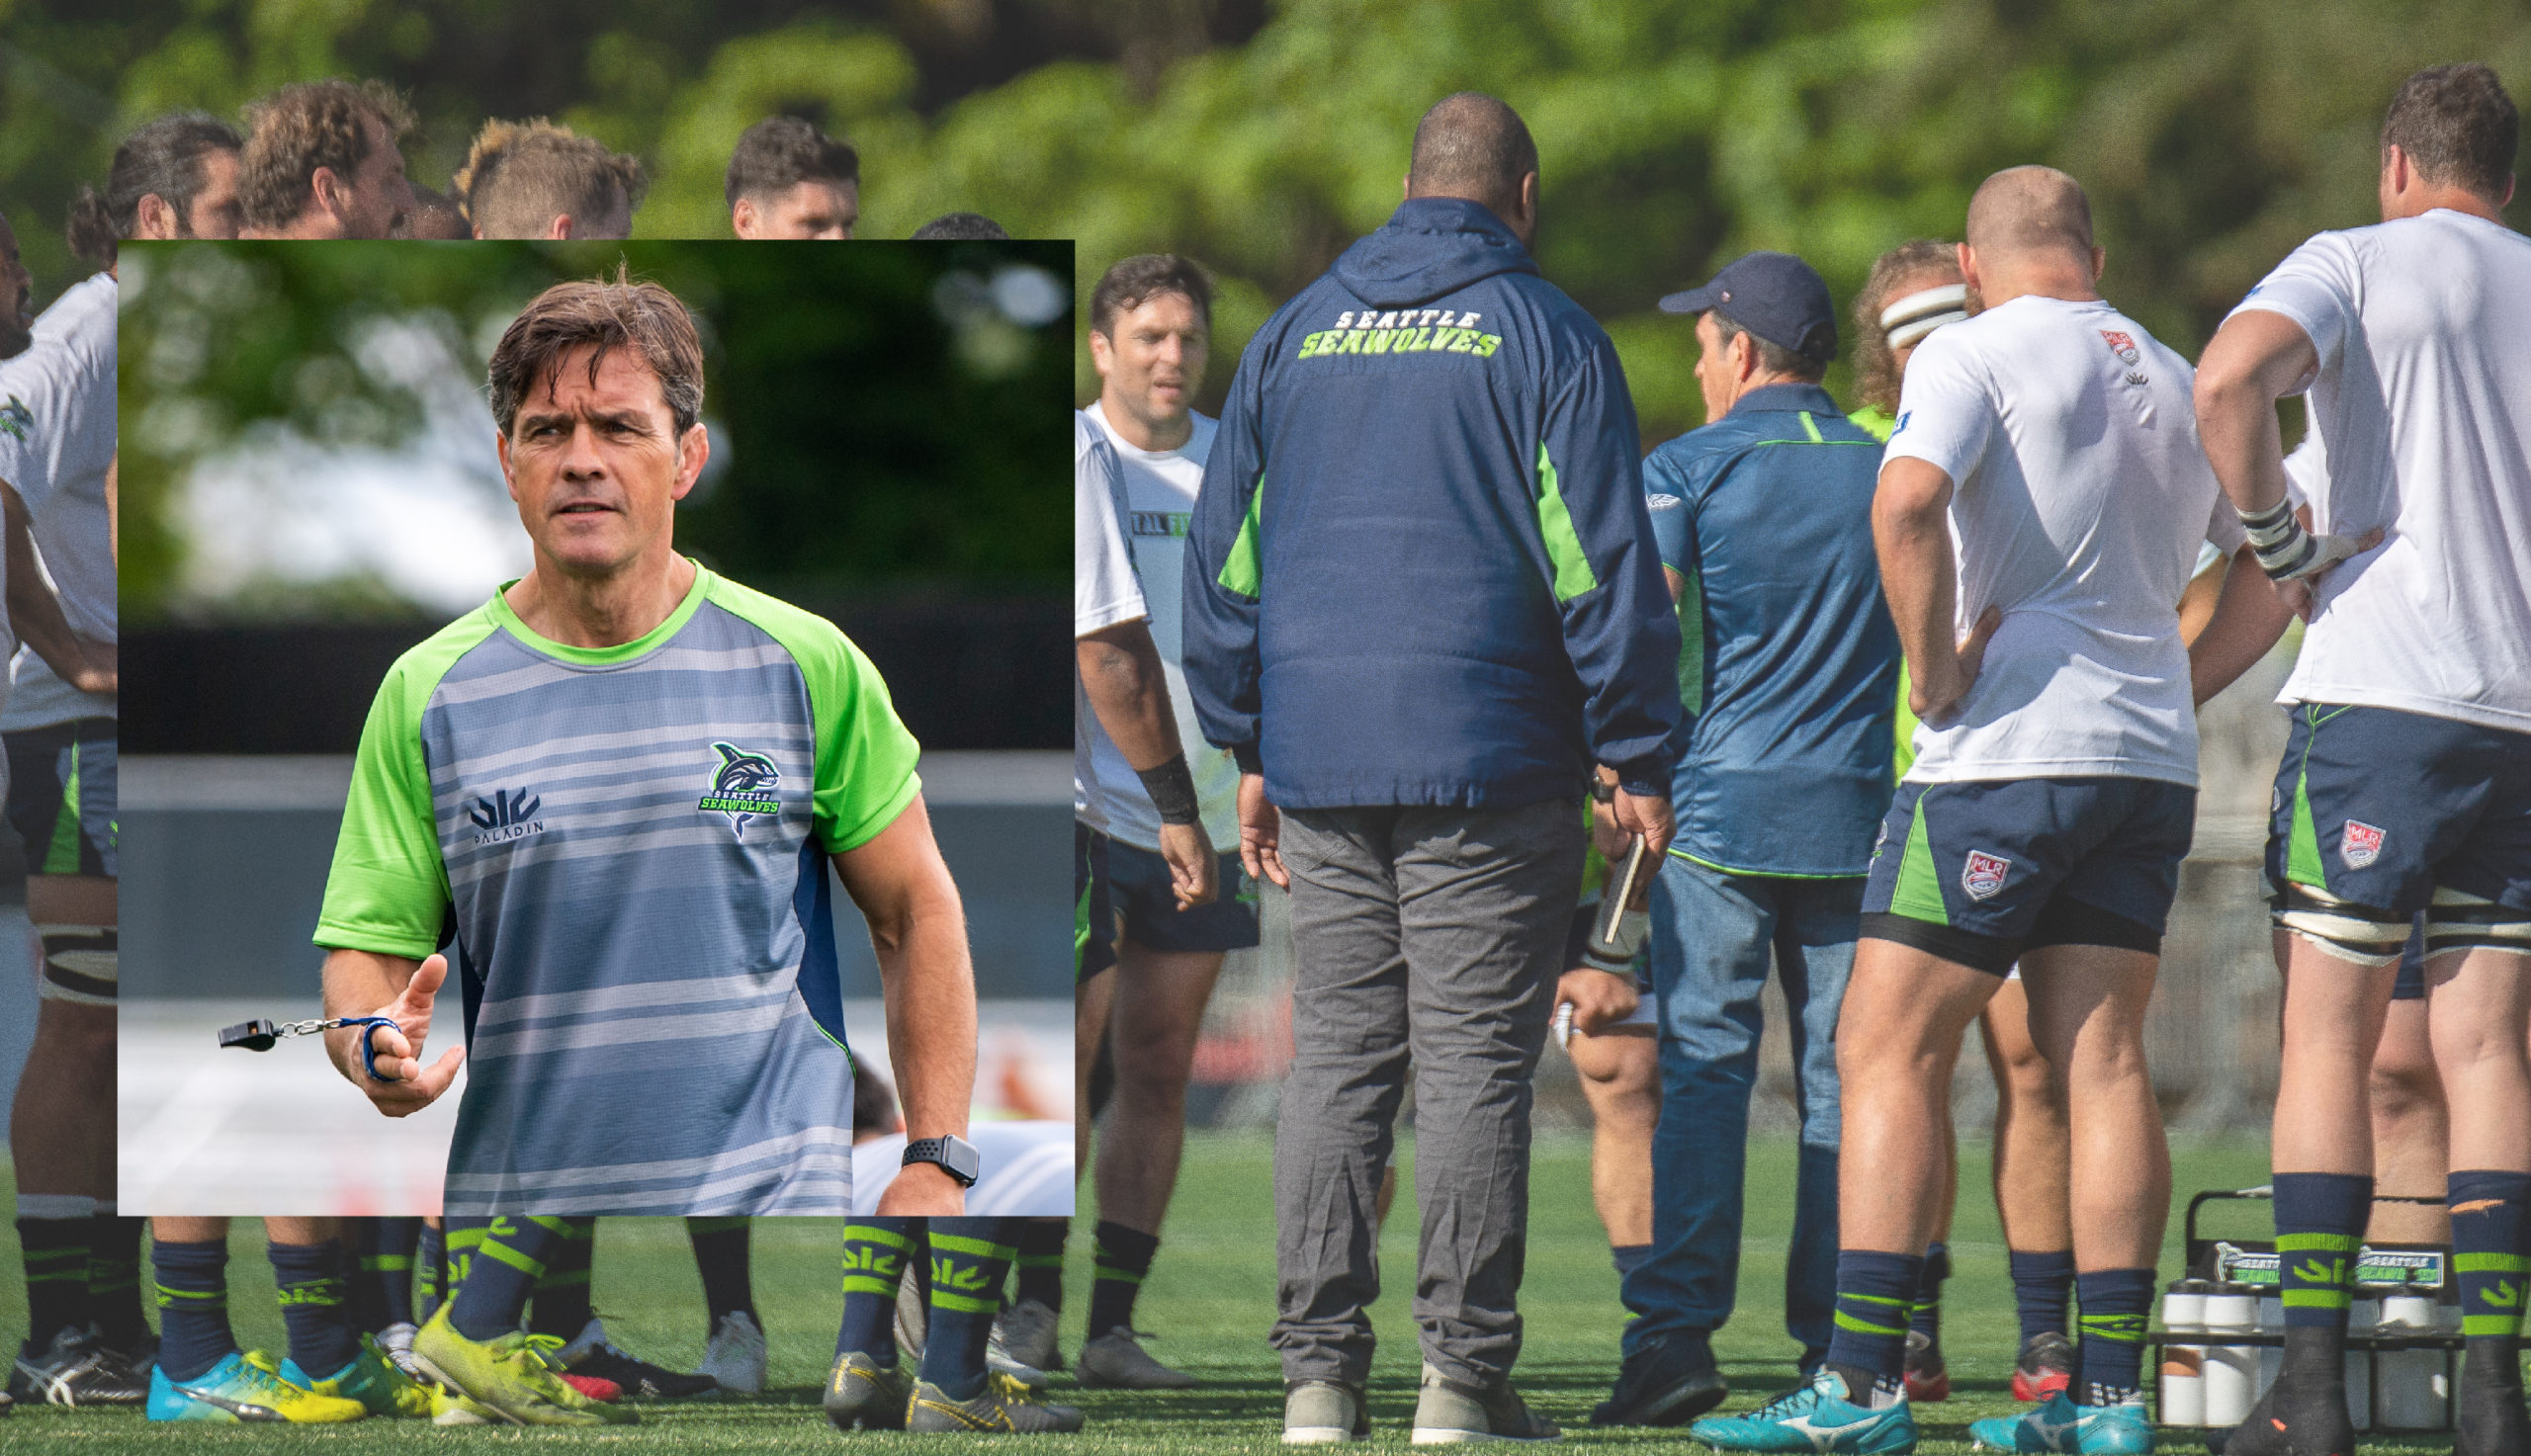 Clarke Elevated to Director of Rugby and Head Coach, Tuilevuka Named General Manager of the Seattle Seawolves